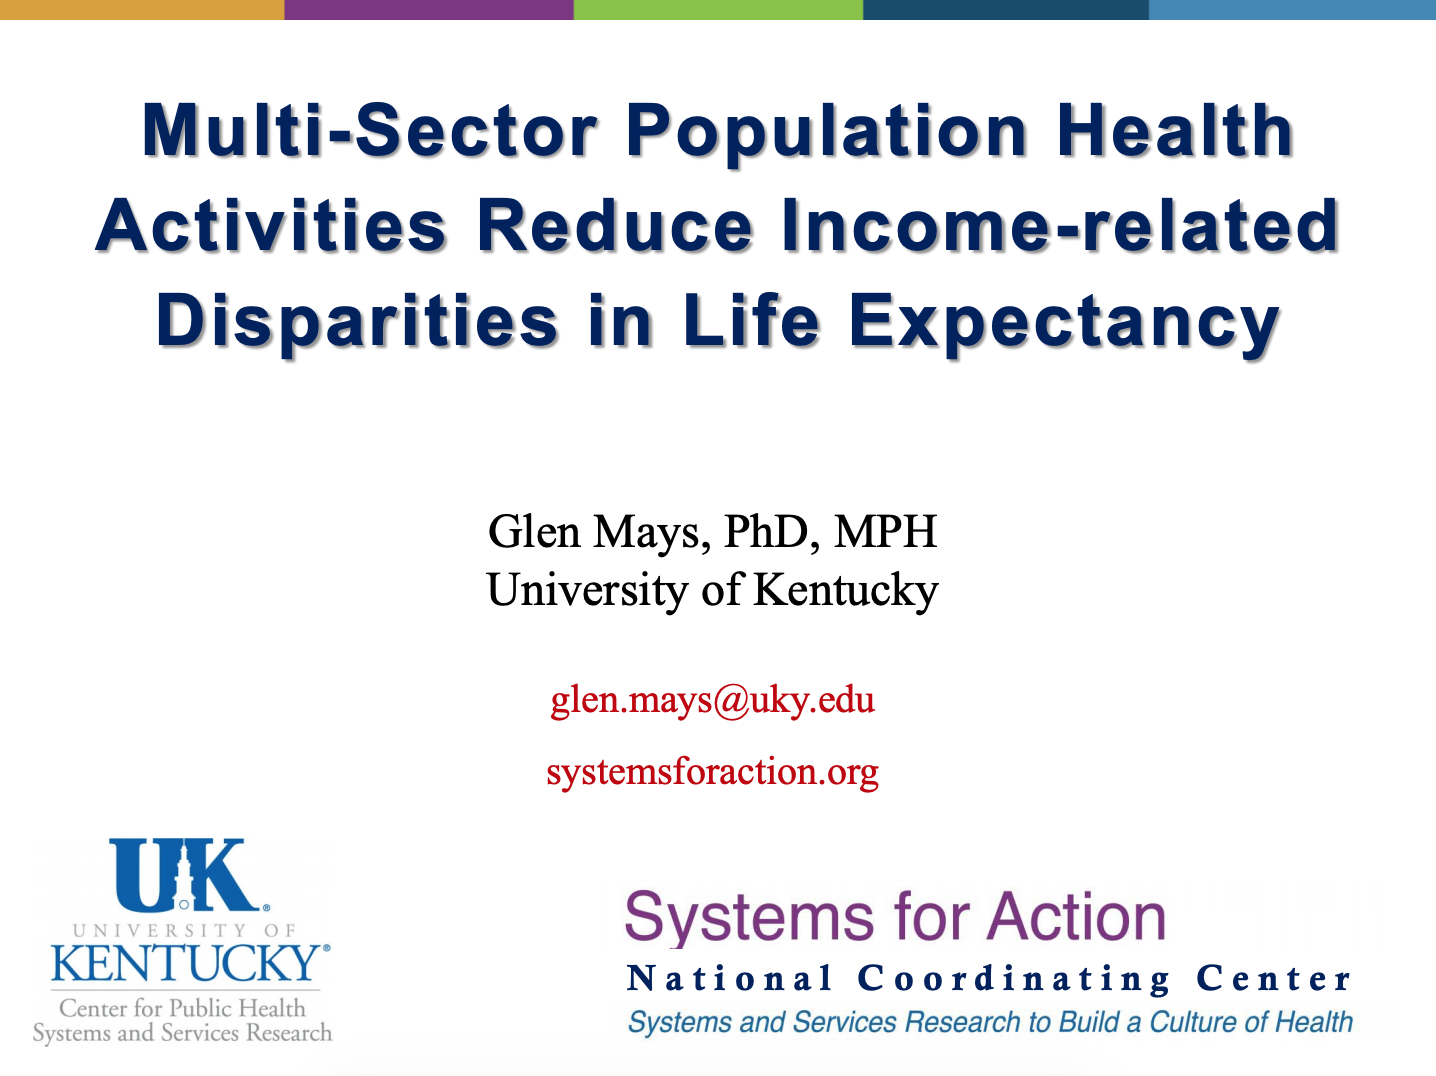 Multi-Sector Population Health Activities Reduce Income-related Disparities in Life Expectancy